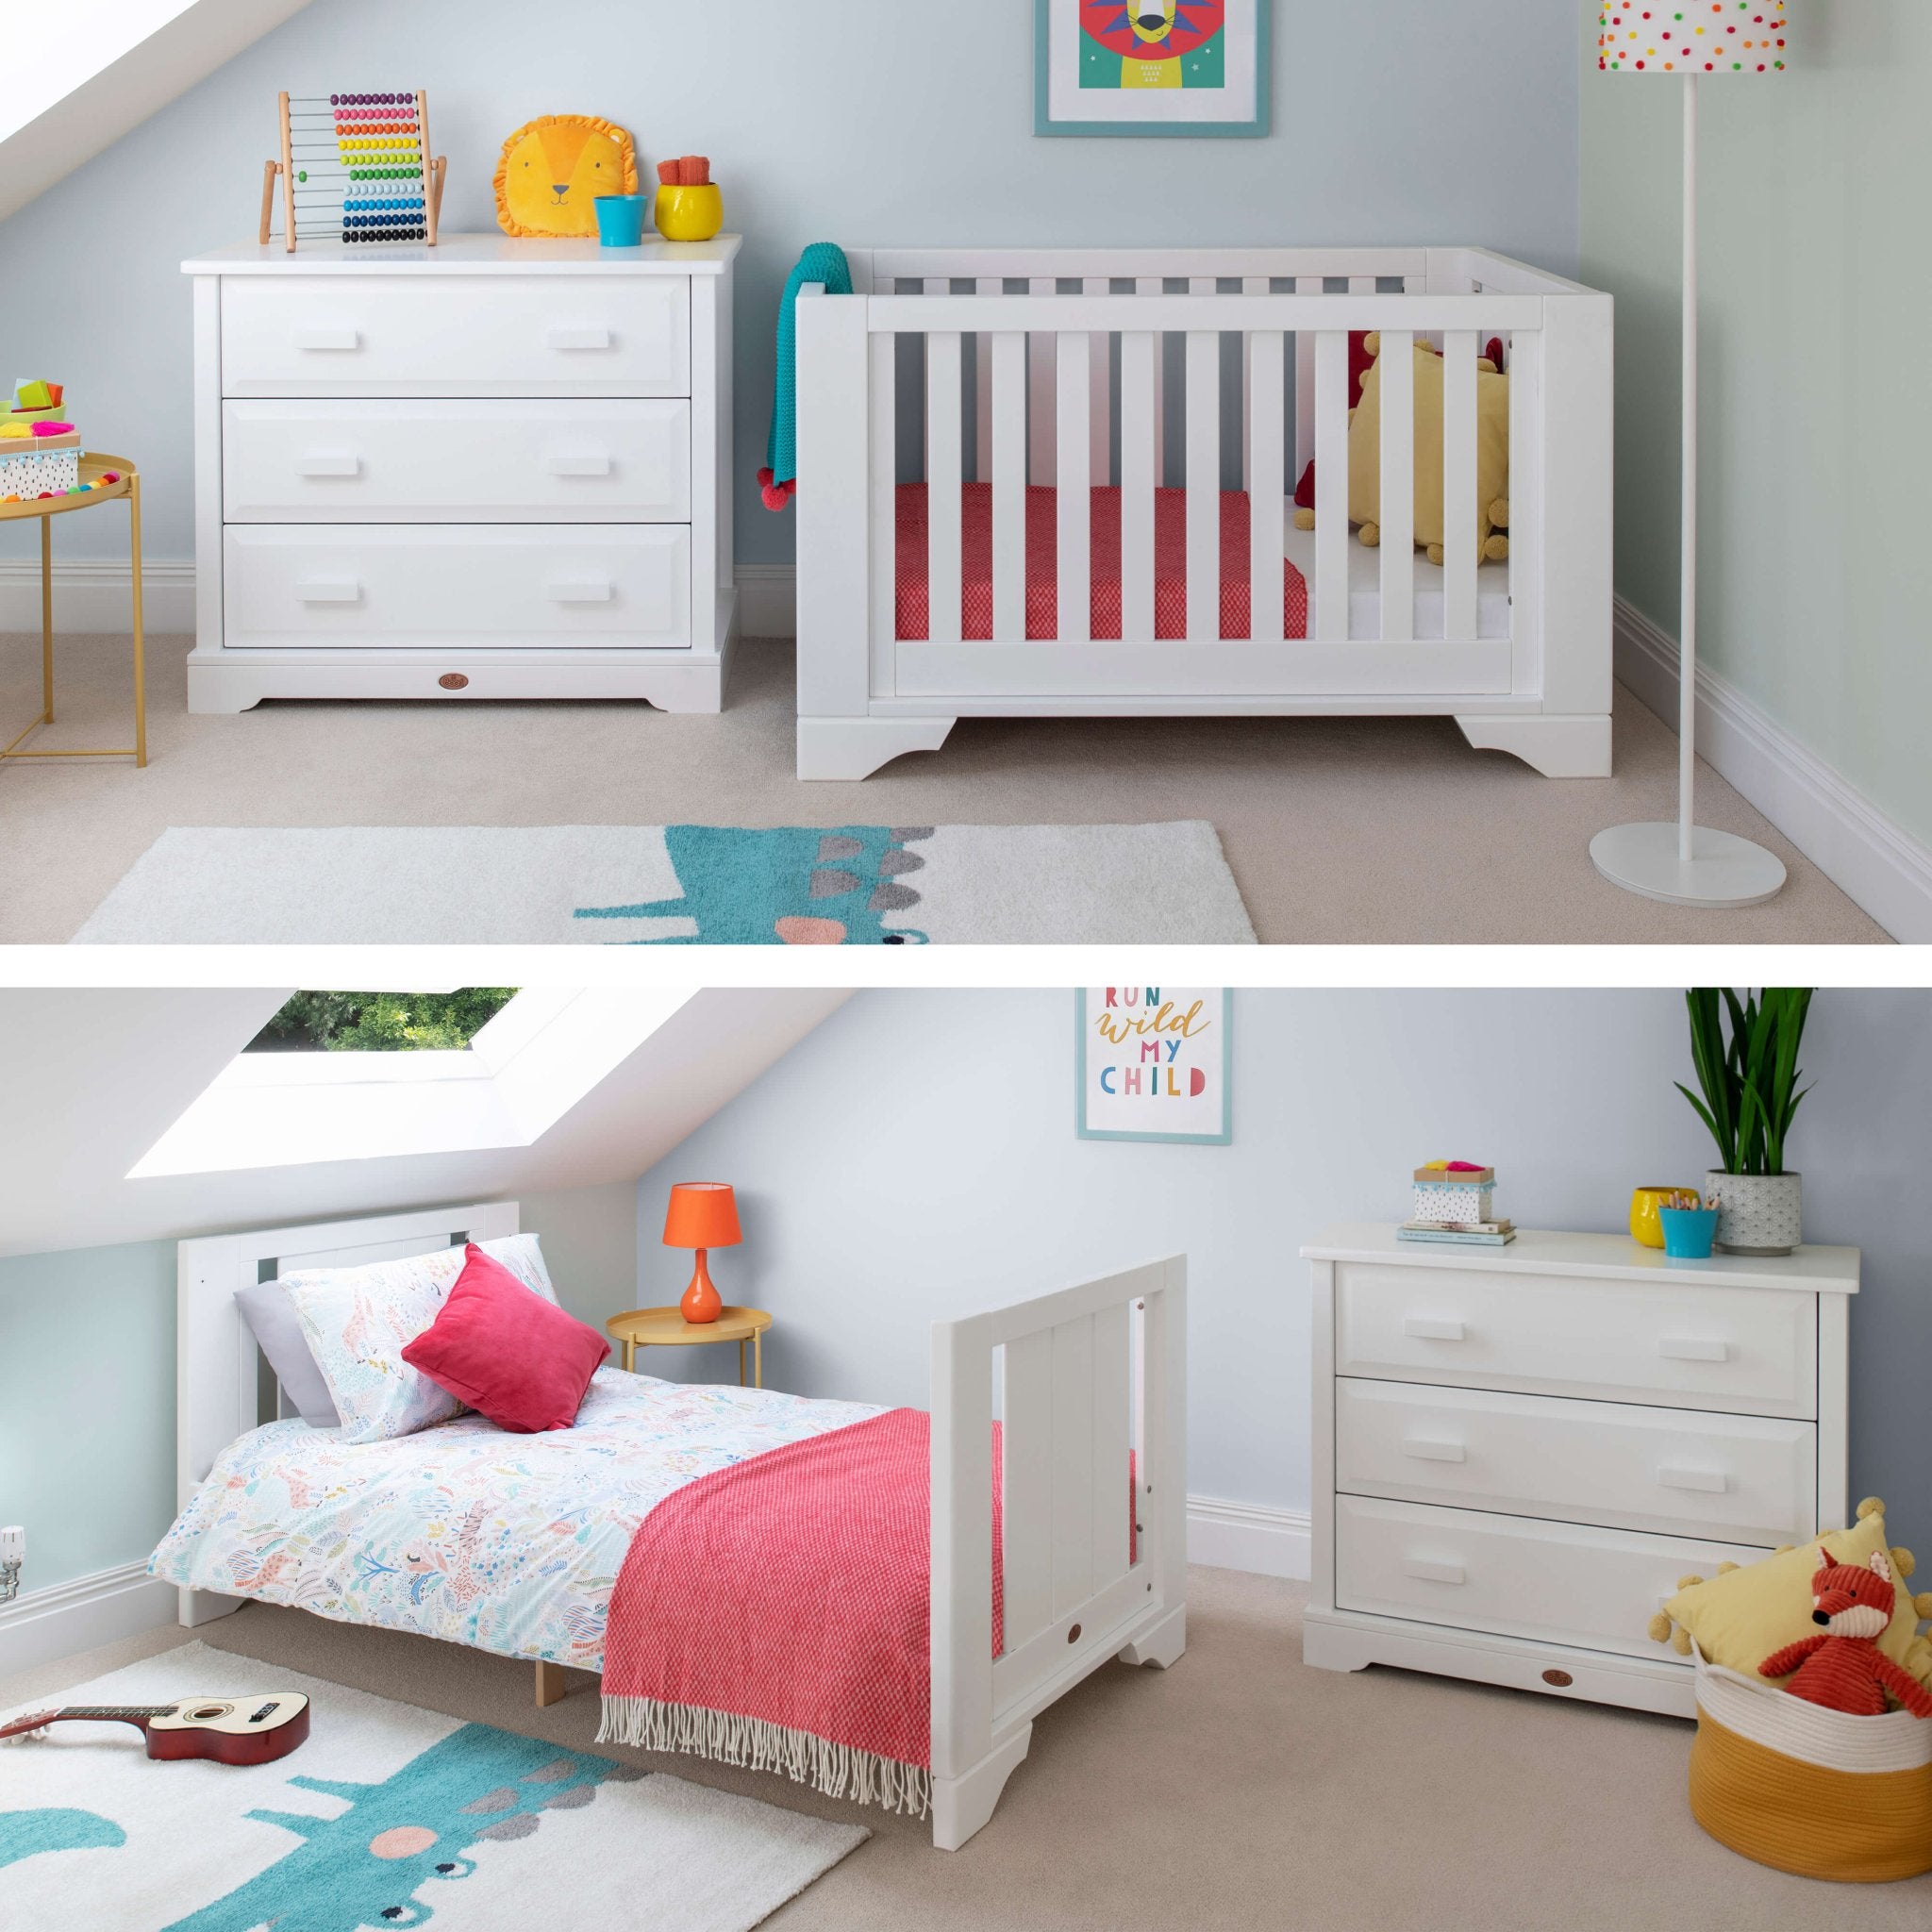 cot bed and dresser in nursery converted into single bed